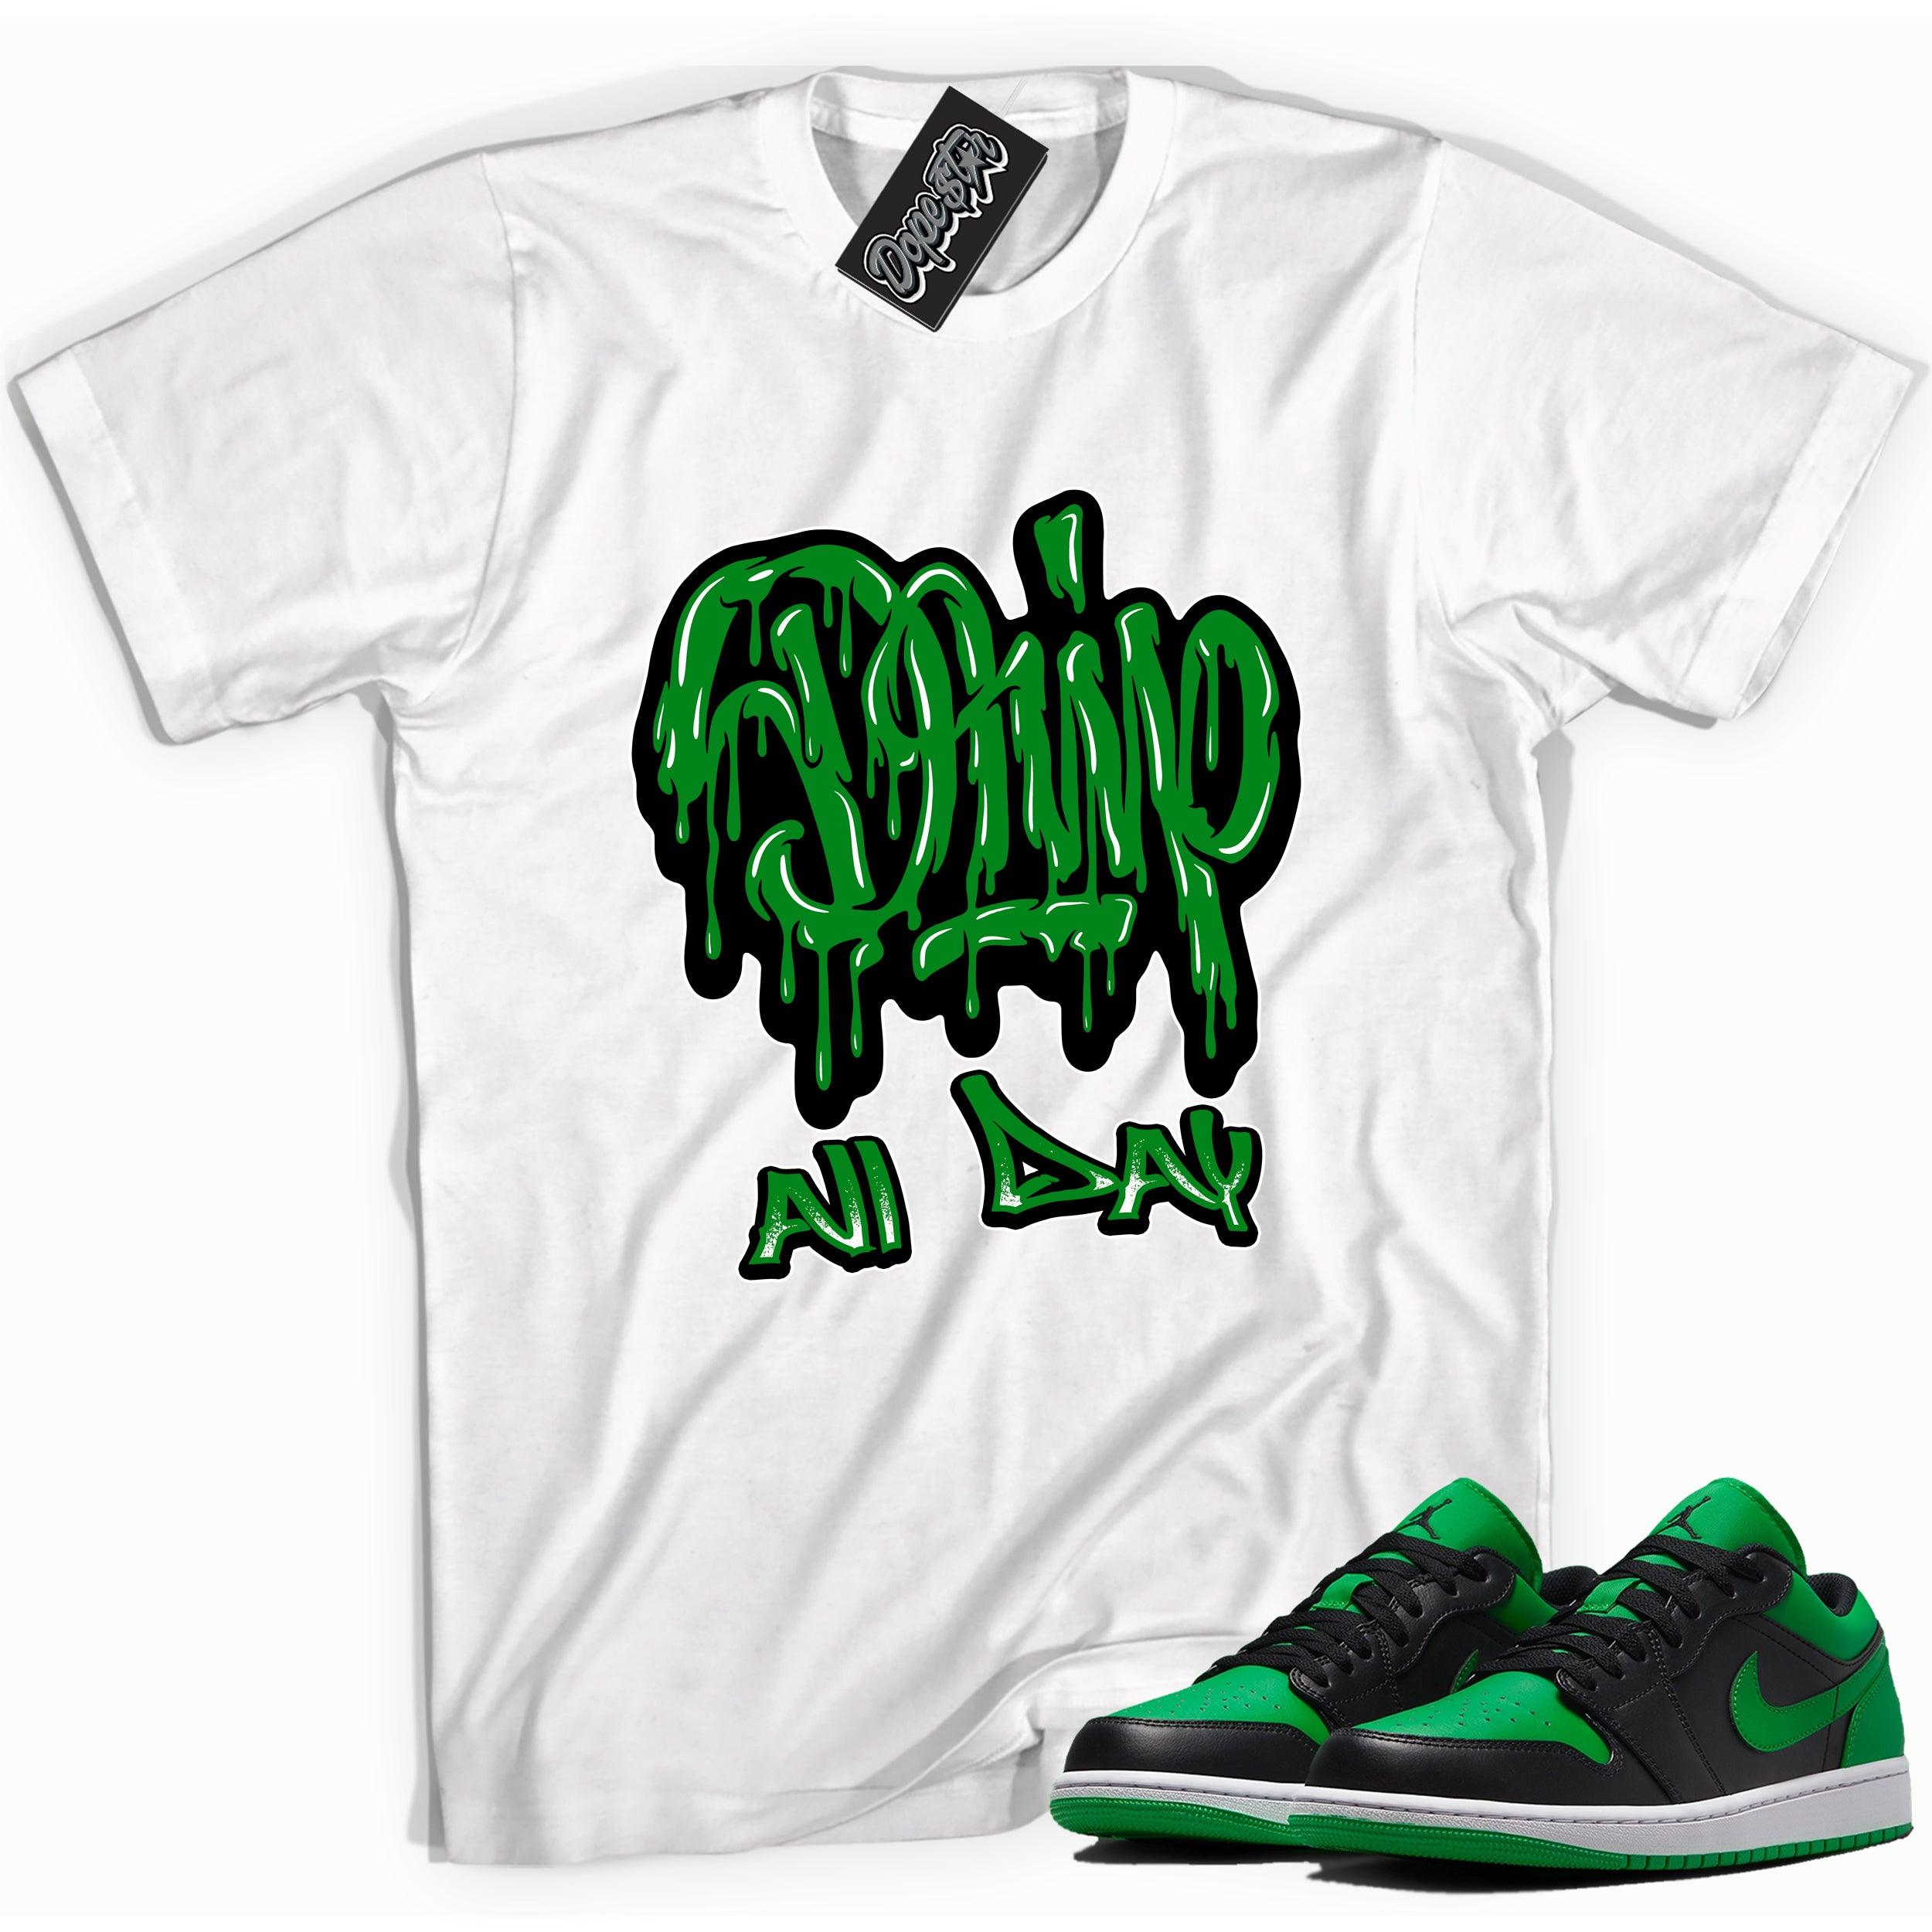 Cool white graphic tee with 'Drip All Day' print, that perfectly matches Air Jordan 1 Low Lucky Green sneakers